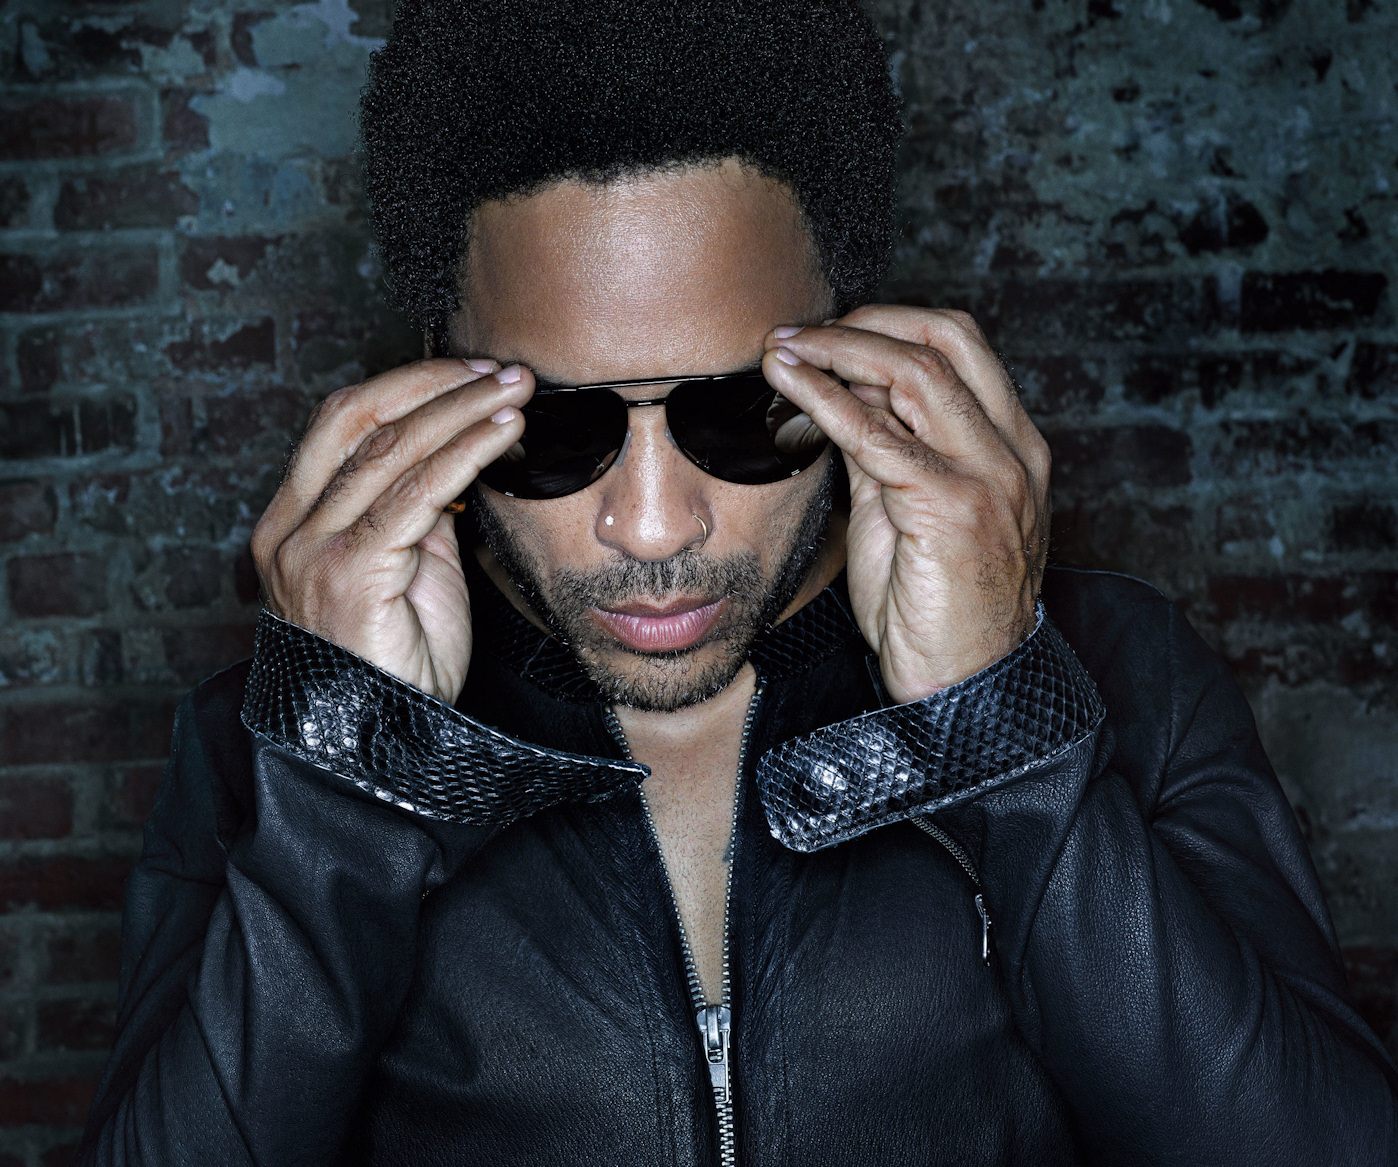 Song of the Day Lenny Kravitz "Breathe" (Eric Roberson Remix)